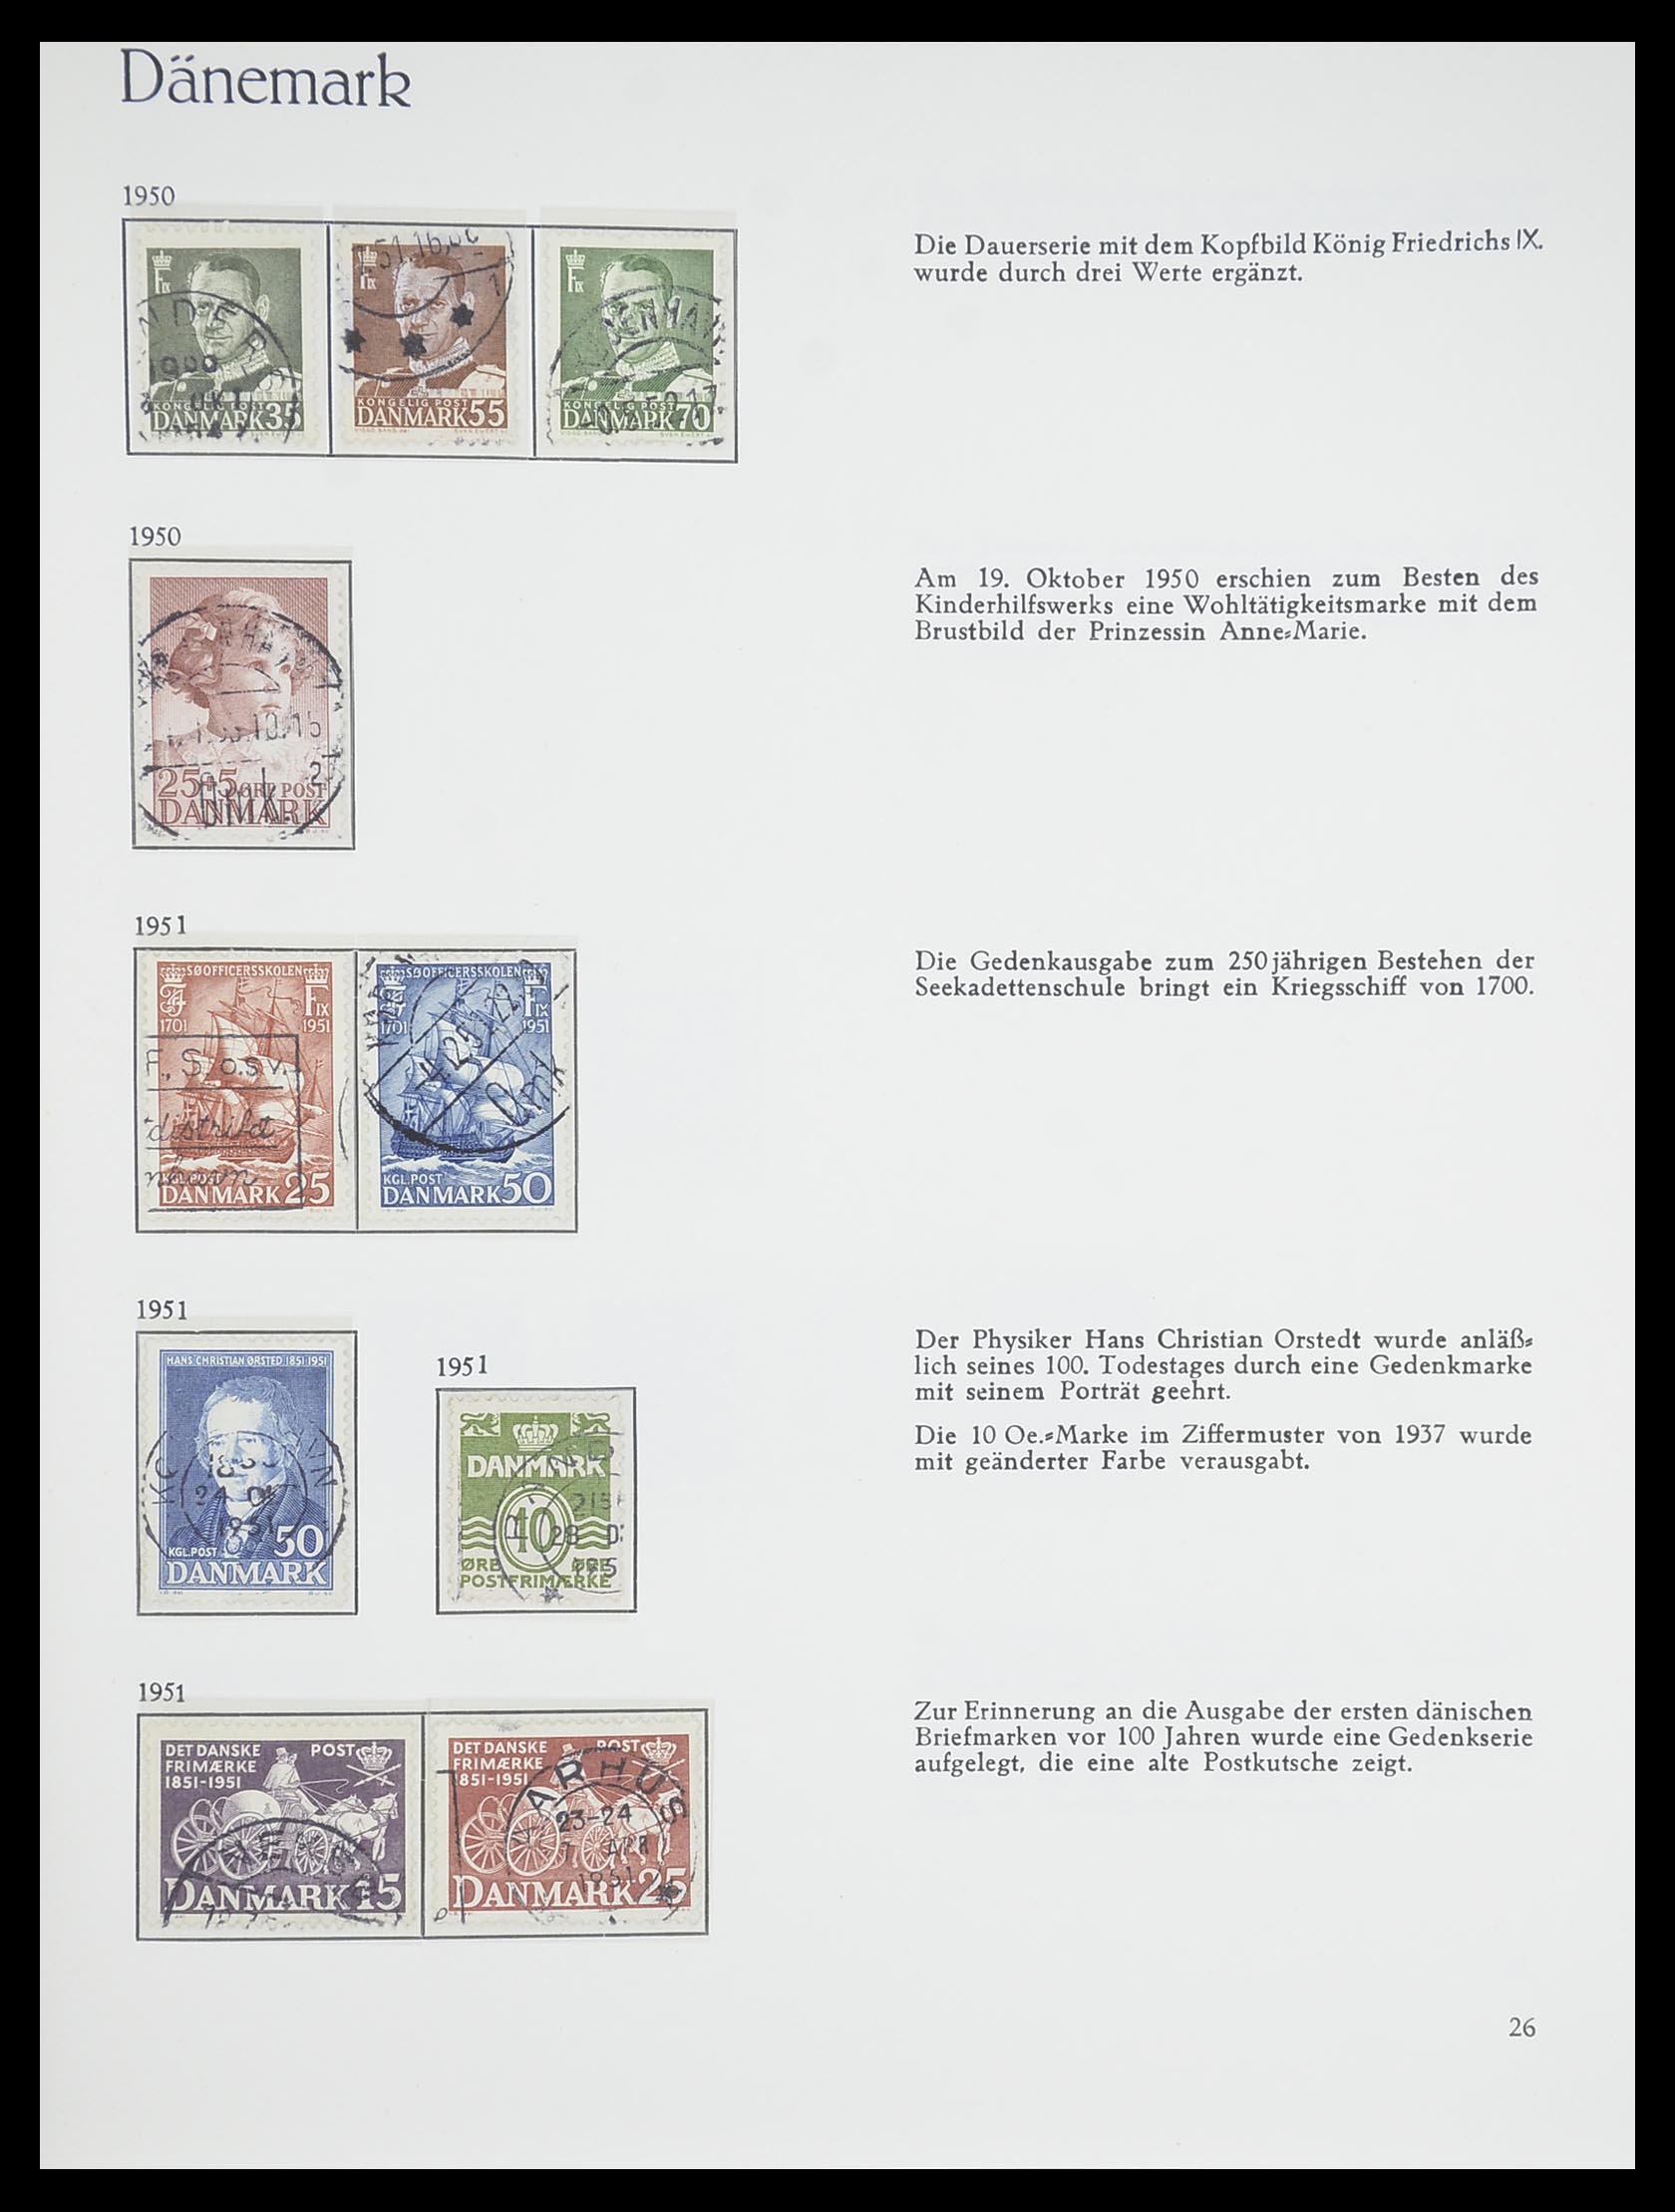 33708 025 - Stamp collection 33708 Denmark 1851-1970.